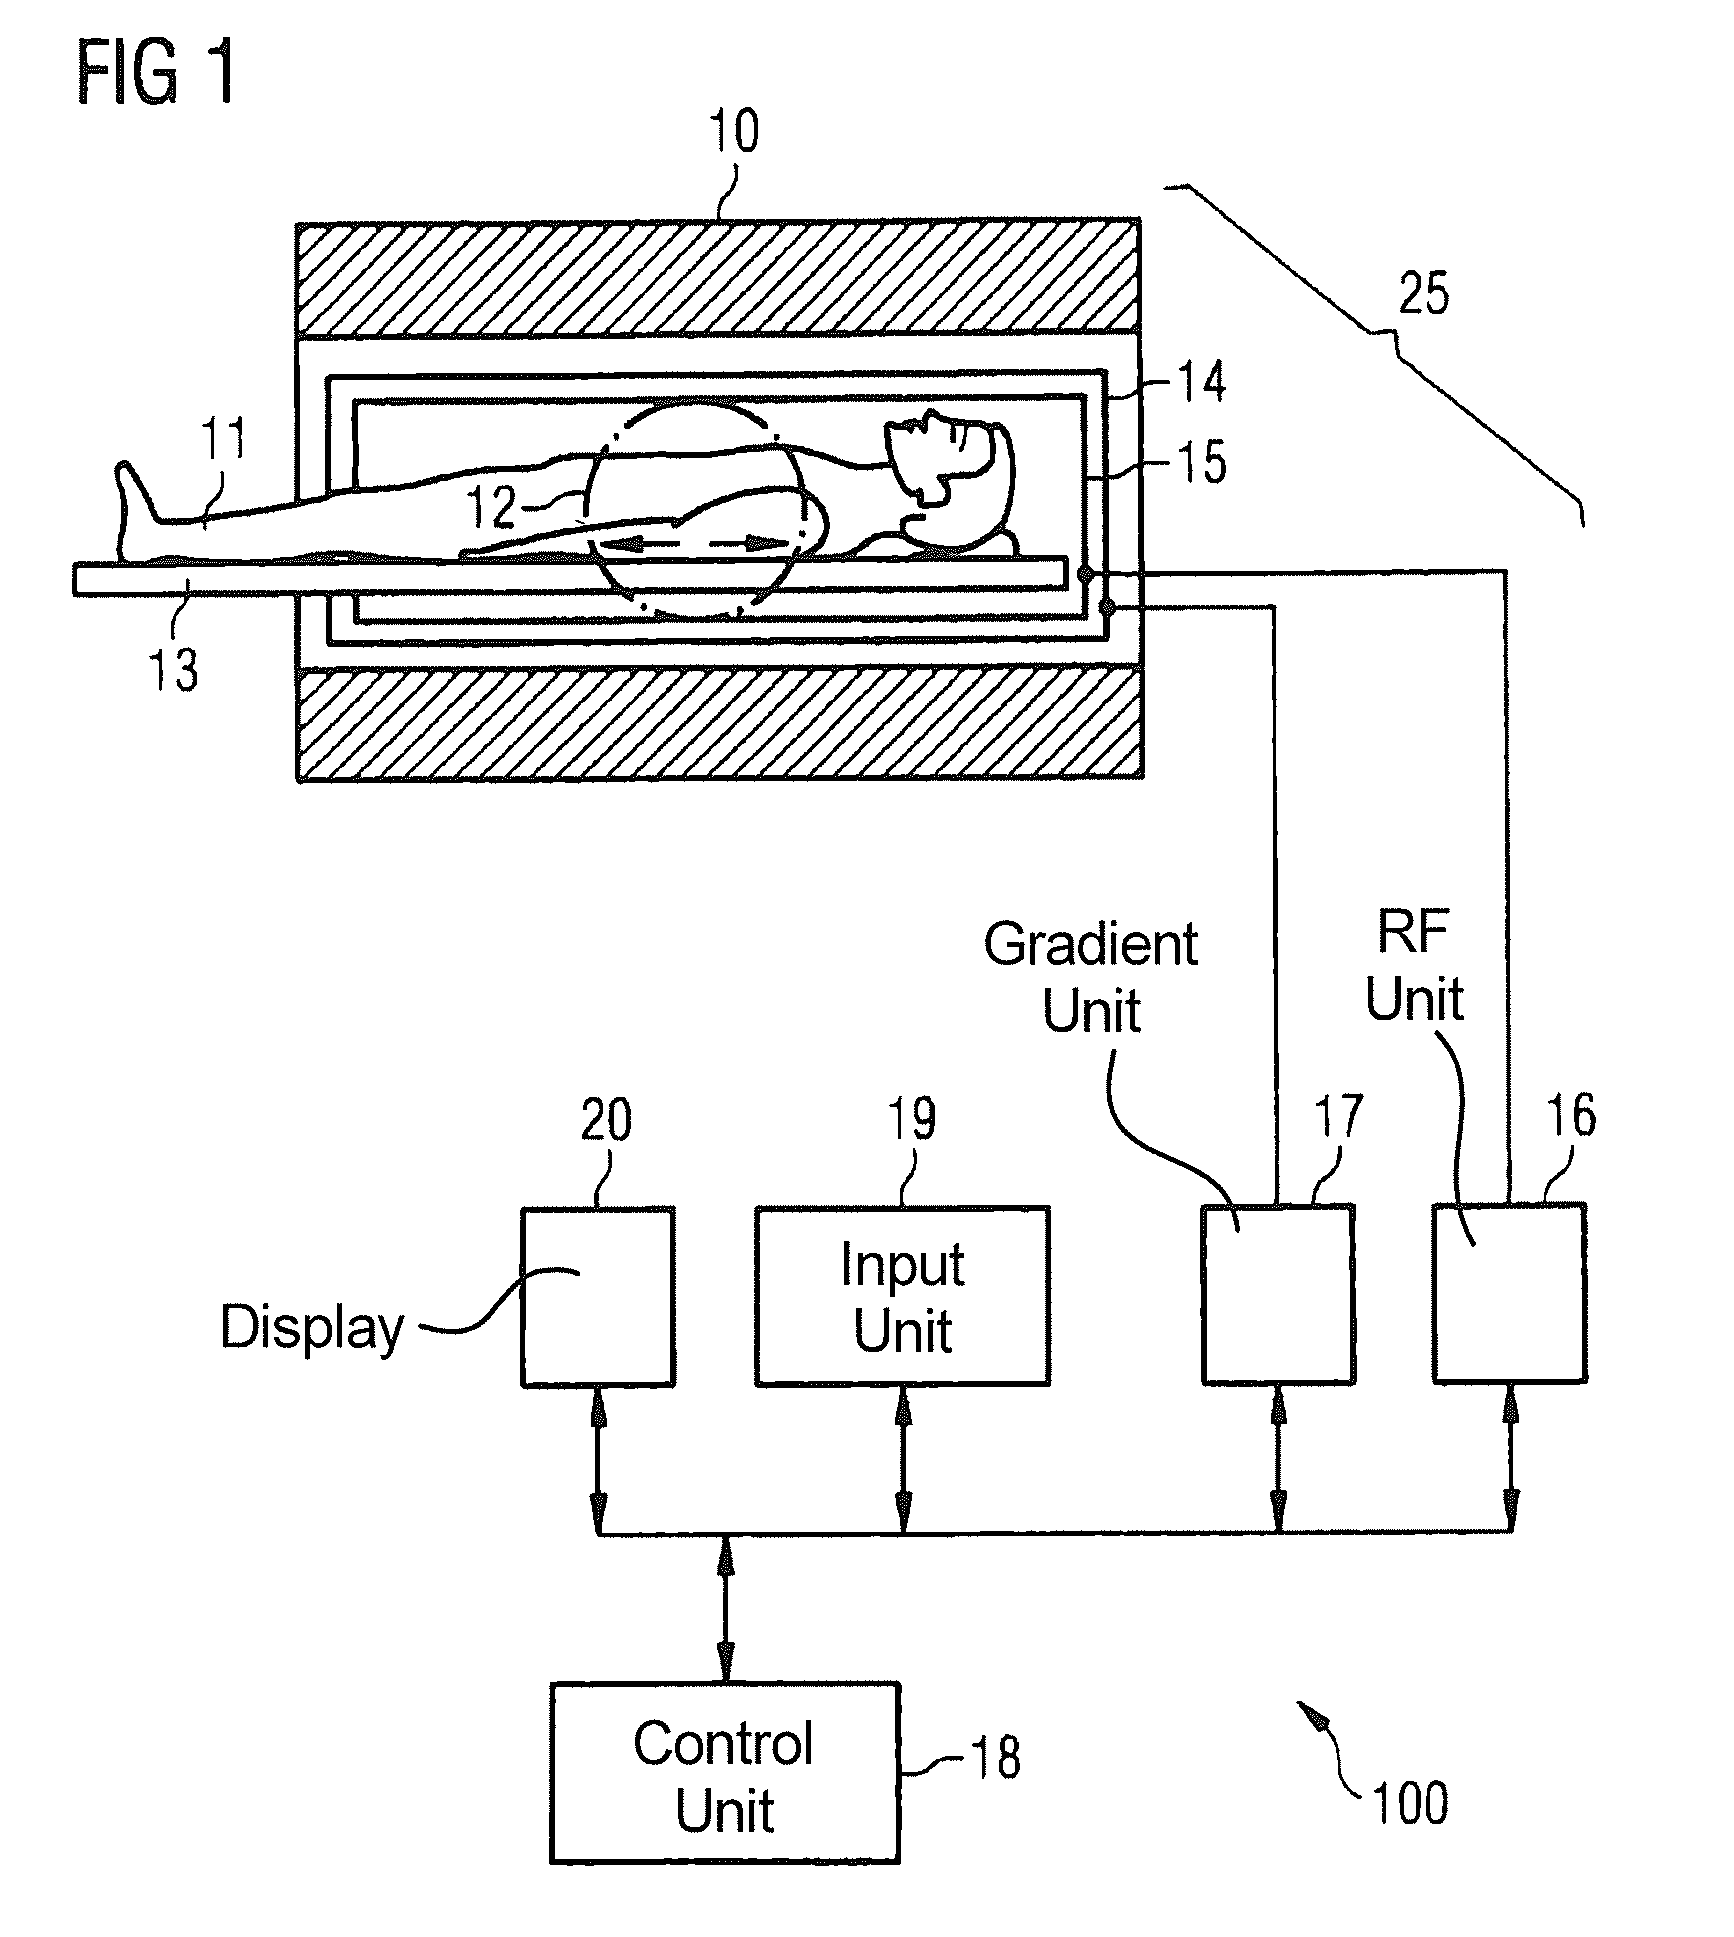 Method and apparatus for magnetic resonance imaging to create T1 maps